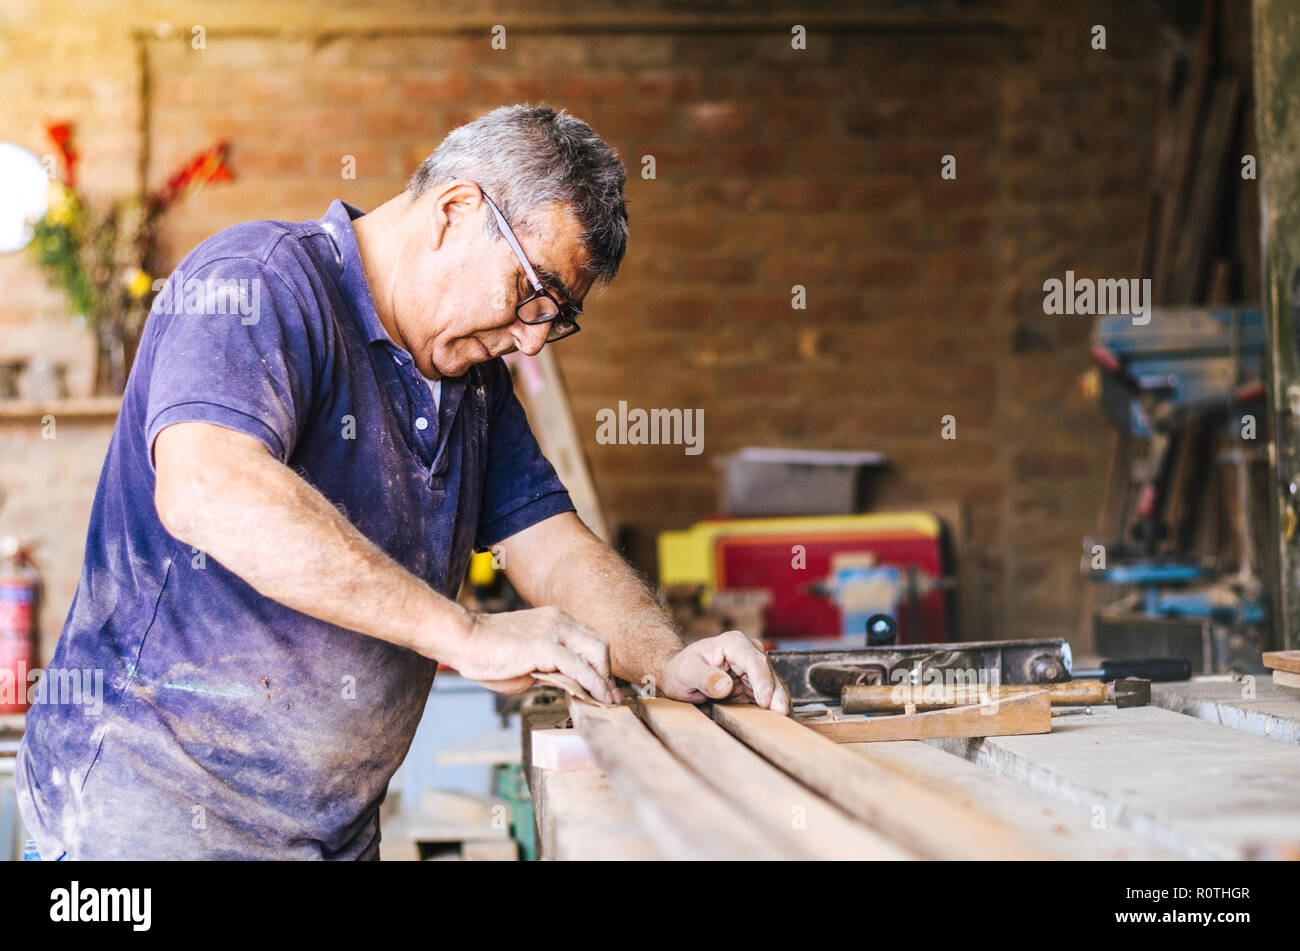 Professional carpenter sanding and restoring wooden surfaces. Stock Photo